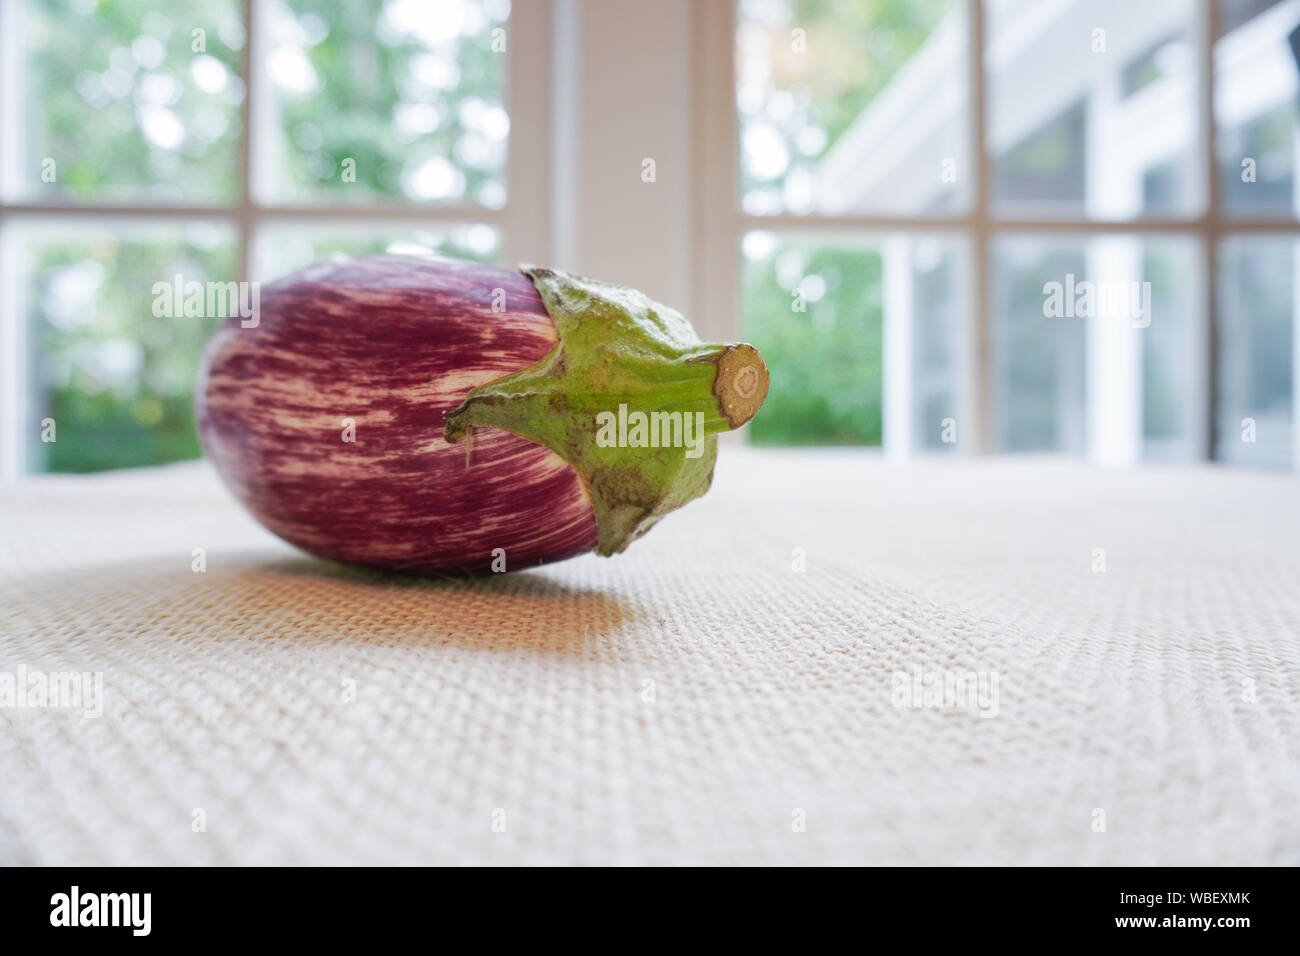 A striped eggplant sits on a rustic burlap tablecloth on a kitchen table with a window in the background Stock Photo